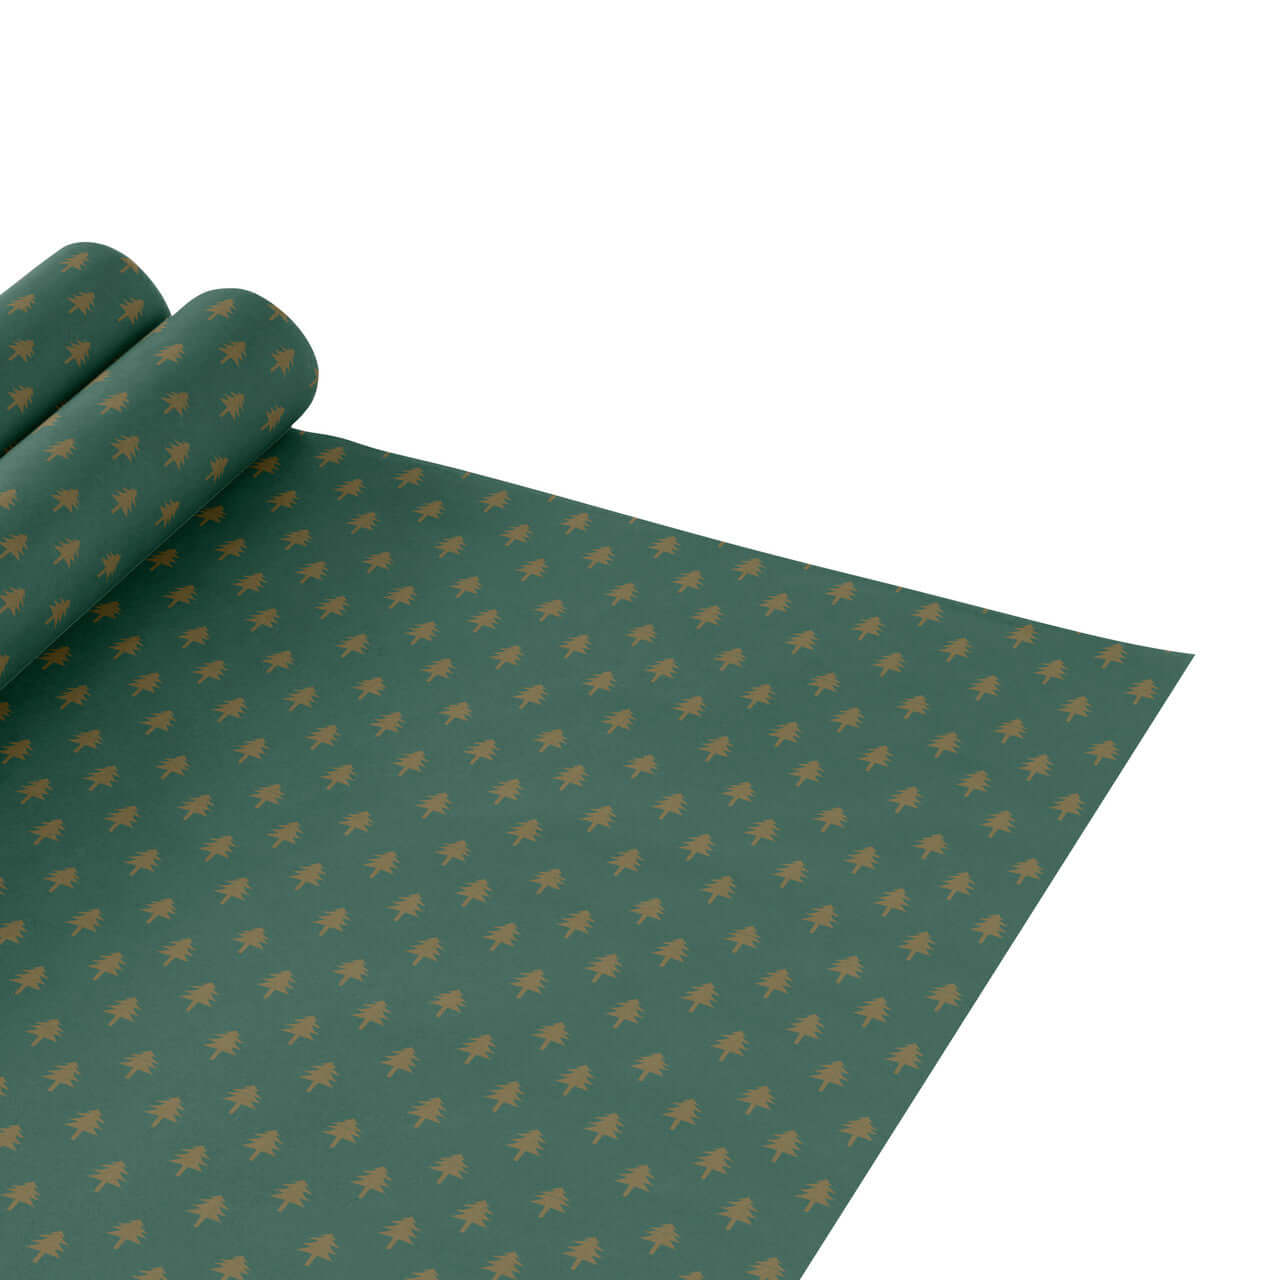 Sustainable wrapping paper for Christmas gifts